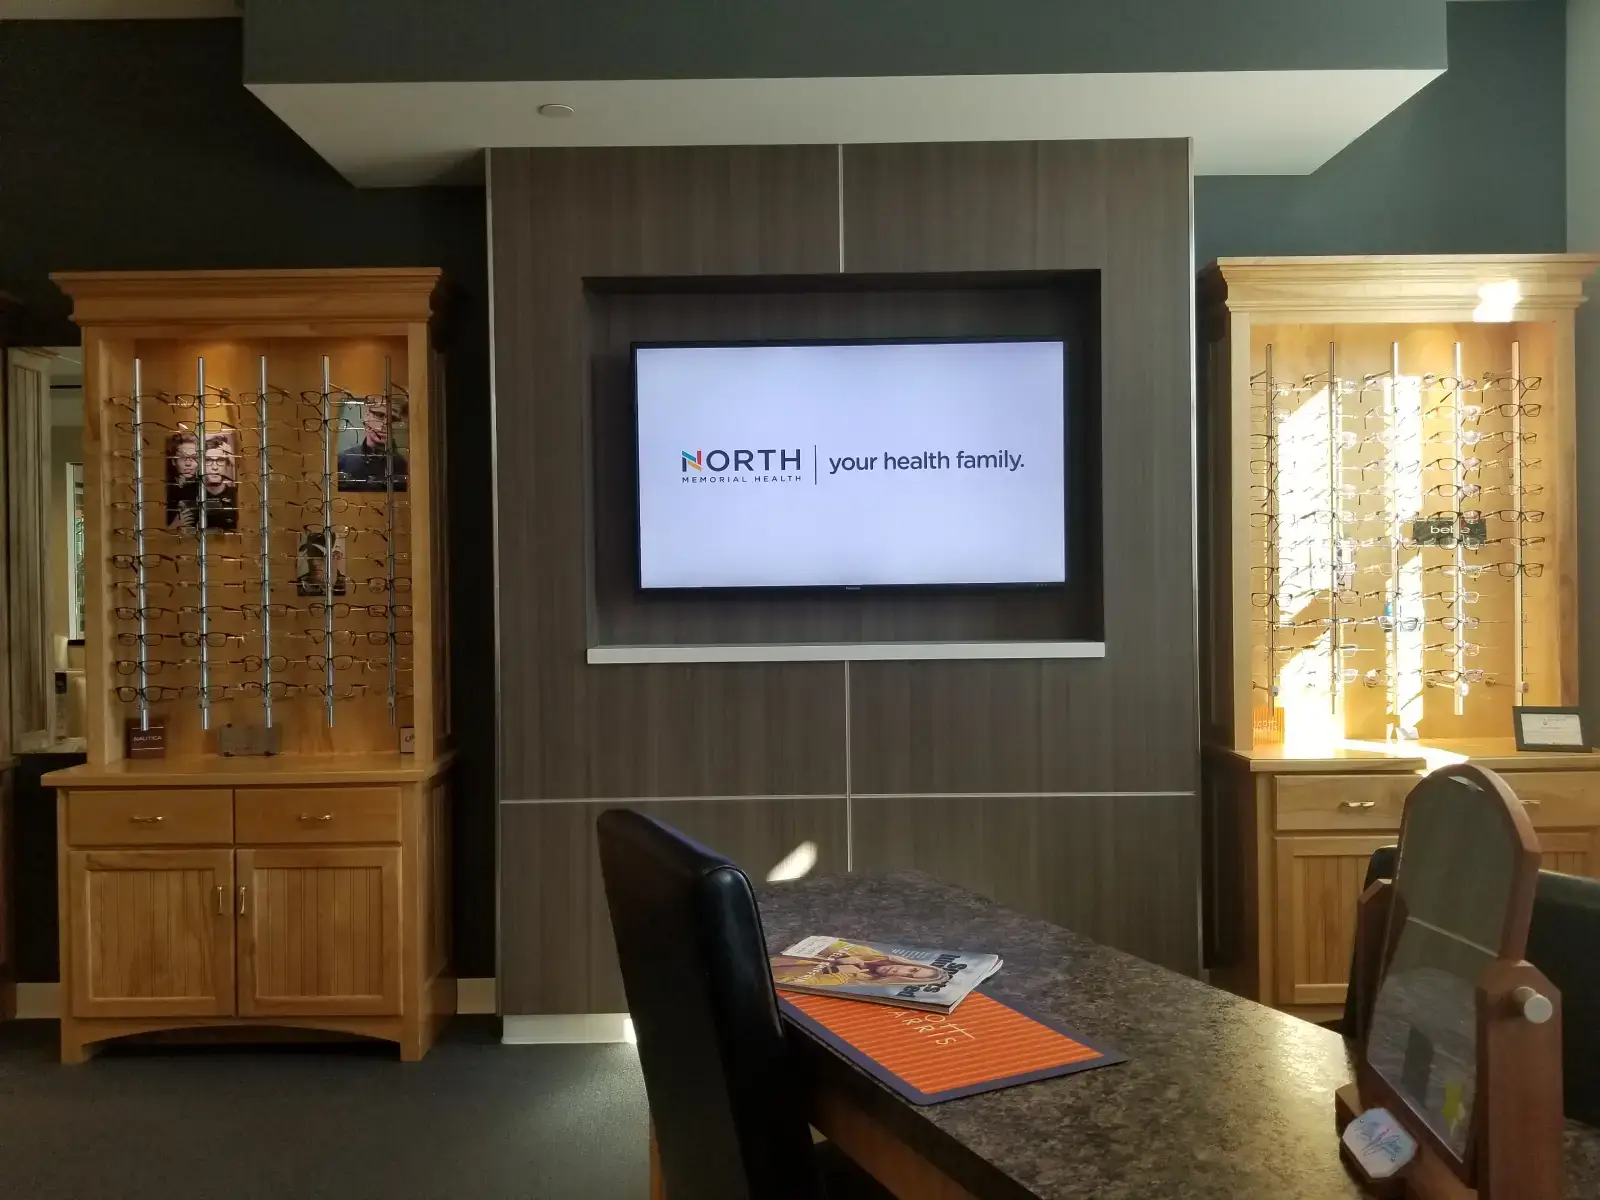 Simple digital signage featured in the lobby of North Memorial Health